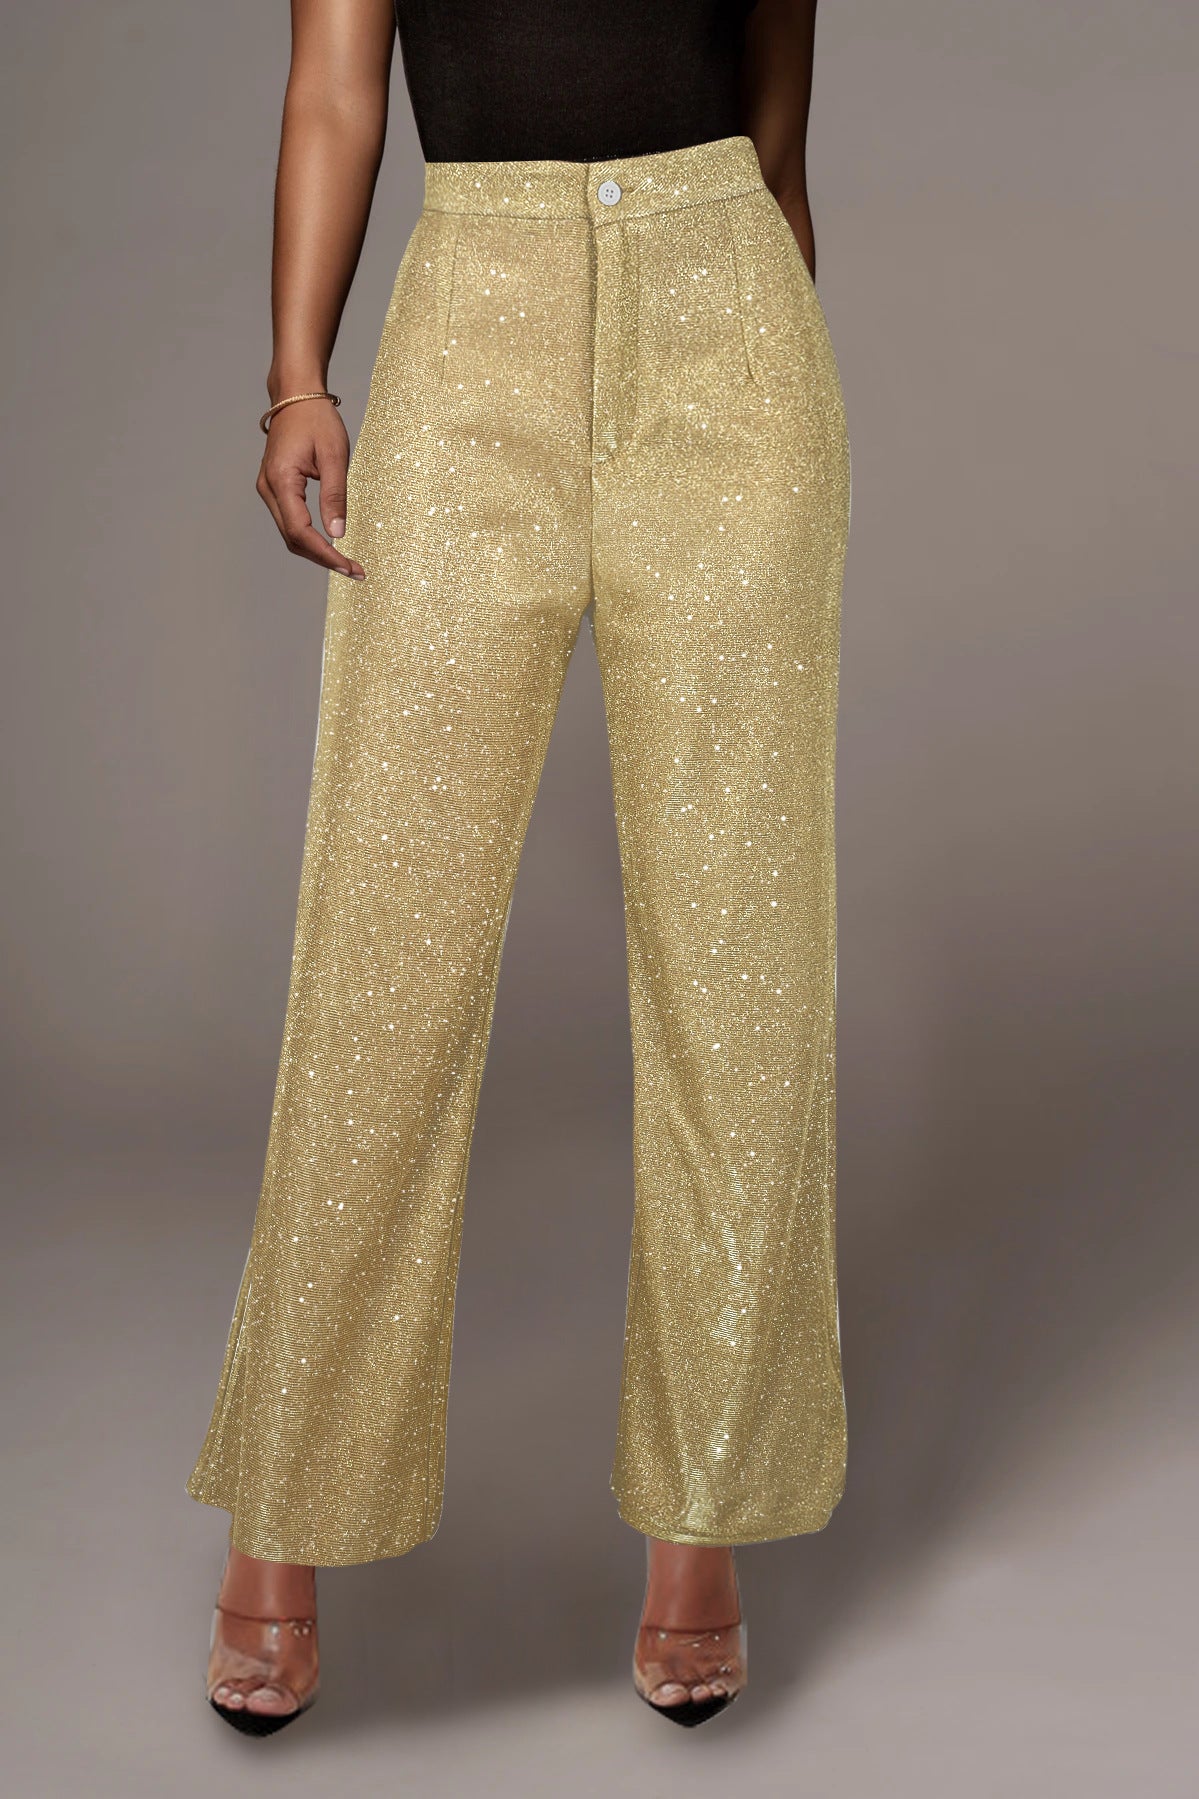 Women's Sequined Party High Waist Retro Wide Pants